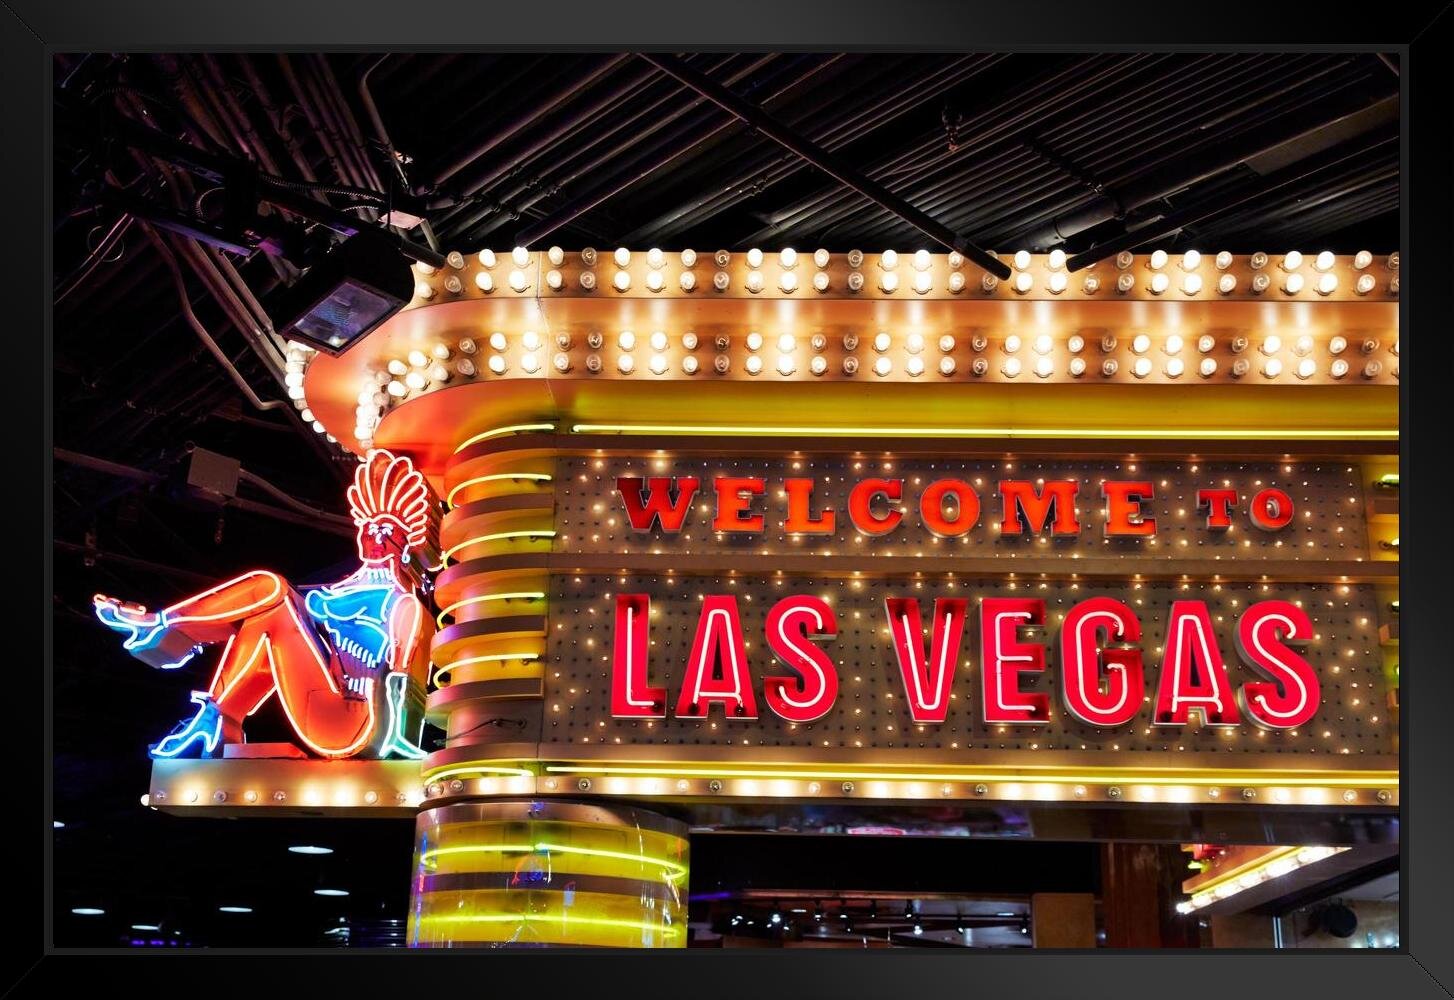 Welcome To Las Vegas Custom Metal Shape Sign 28 x 21 Inches